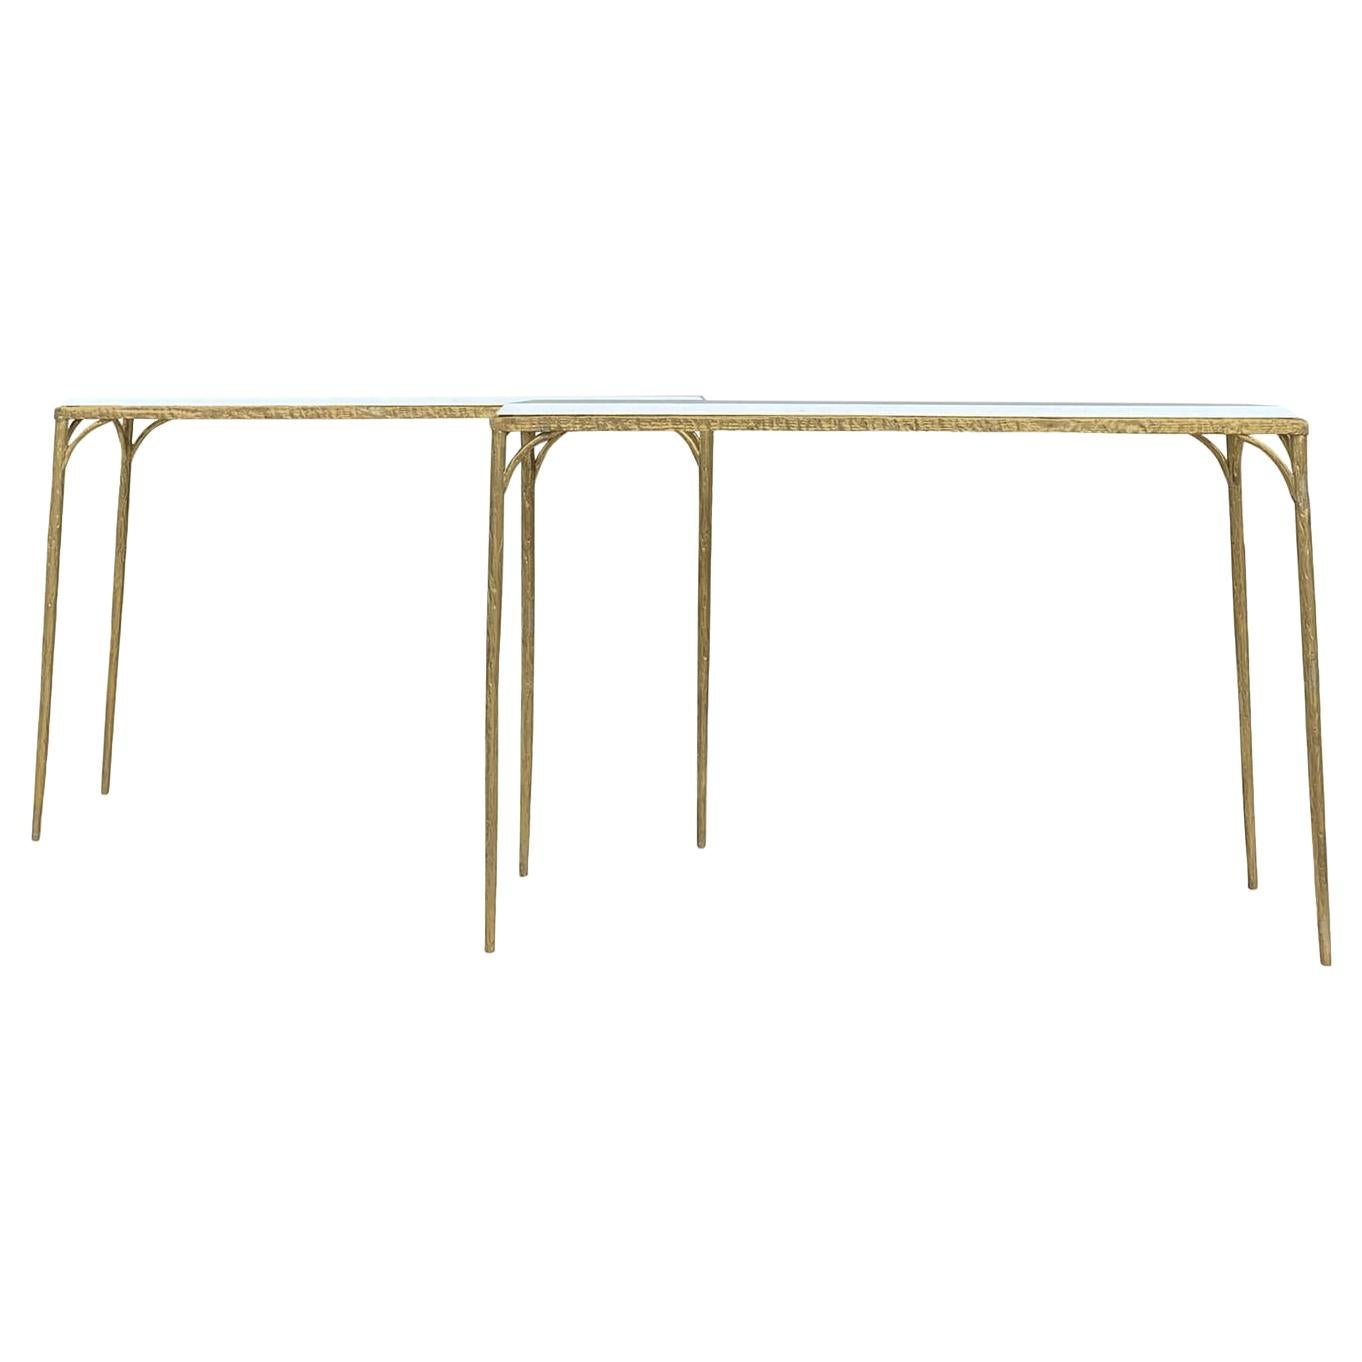 20th Century French Pair of Bronze Console Tables in the Style of Maison Baguès